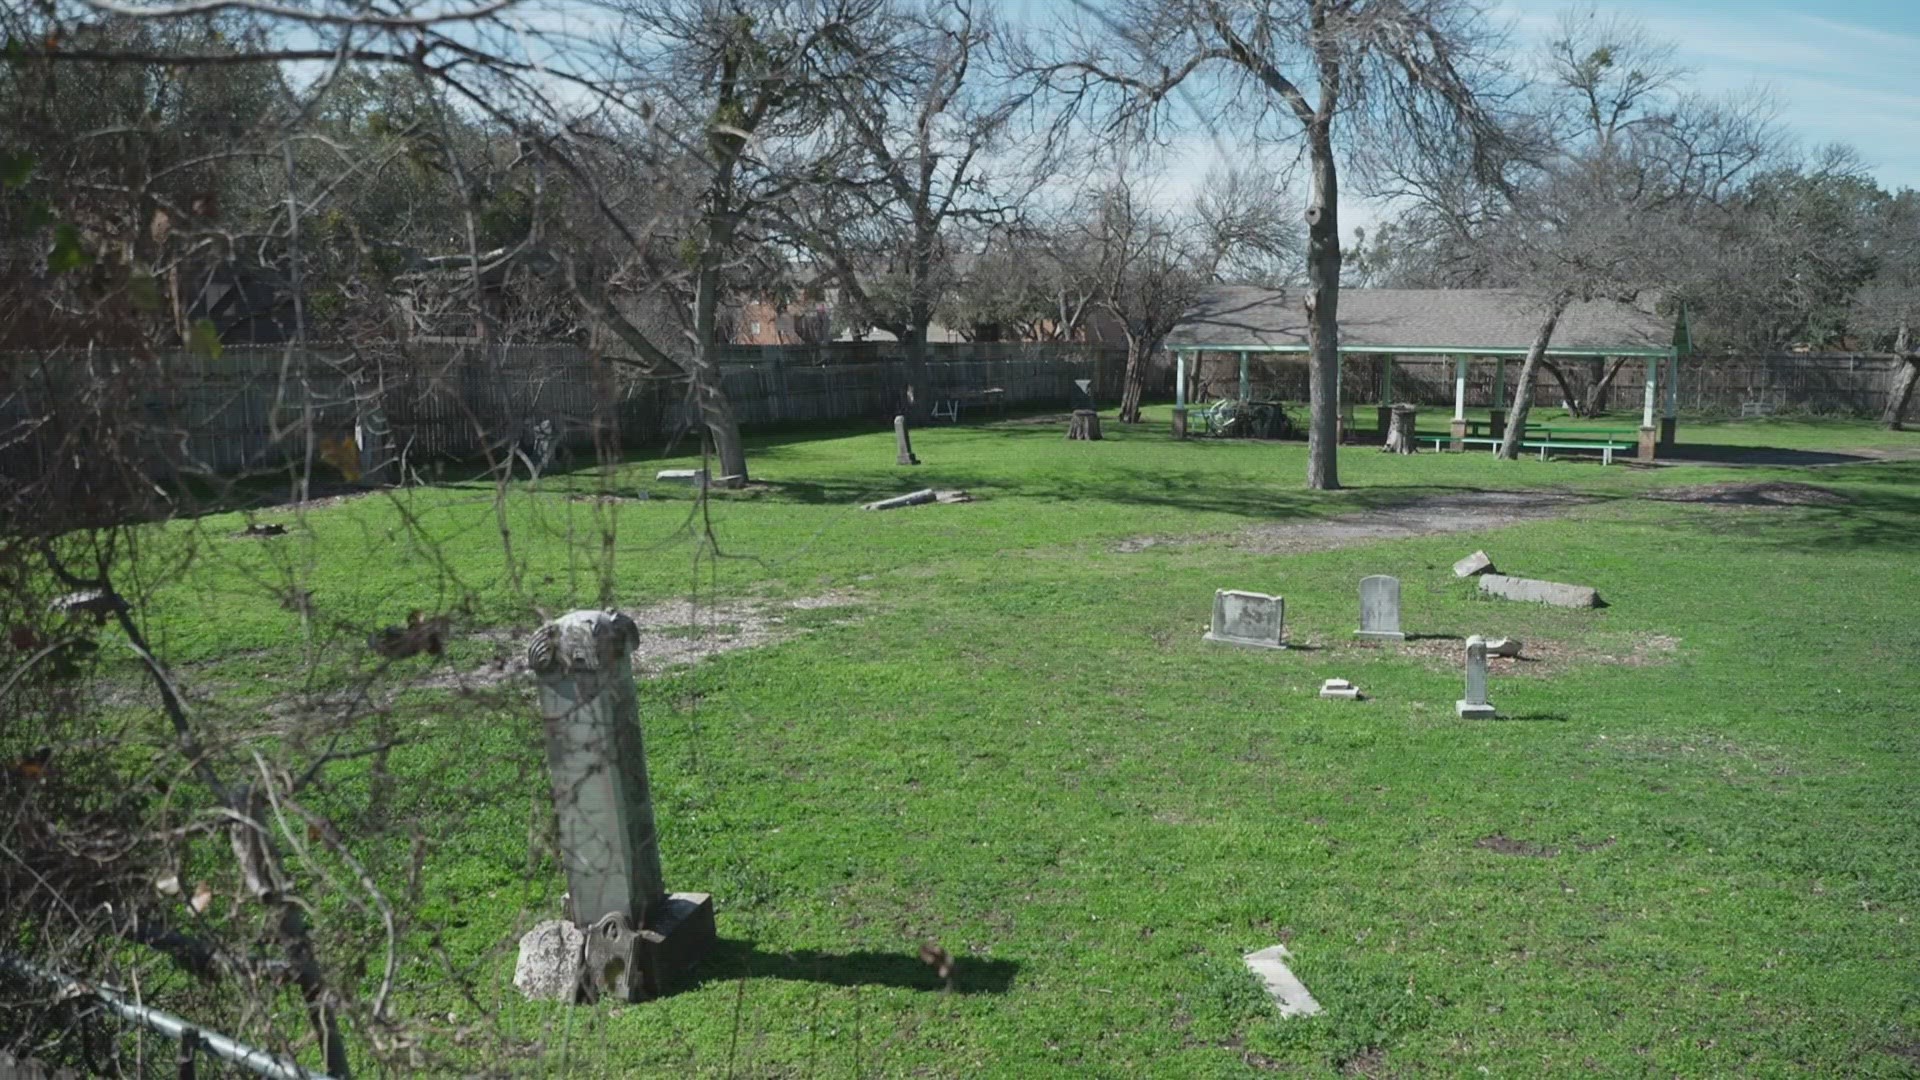 The historically black cemetery has stood for 172 years in North Dallas.